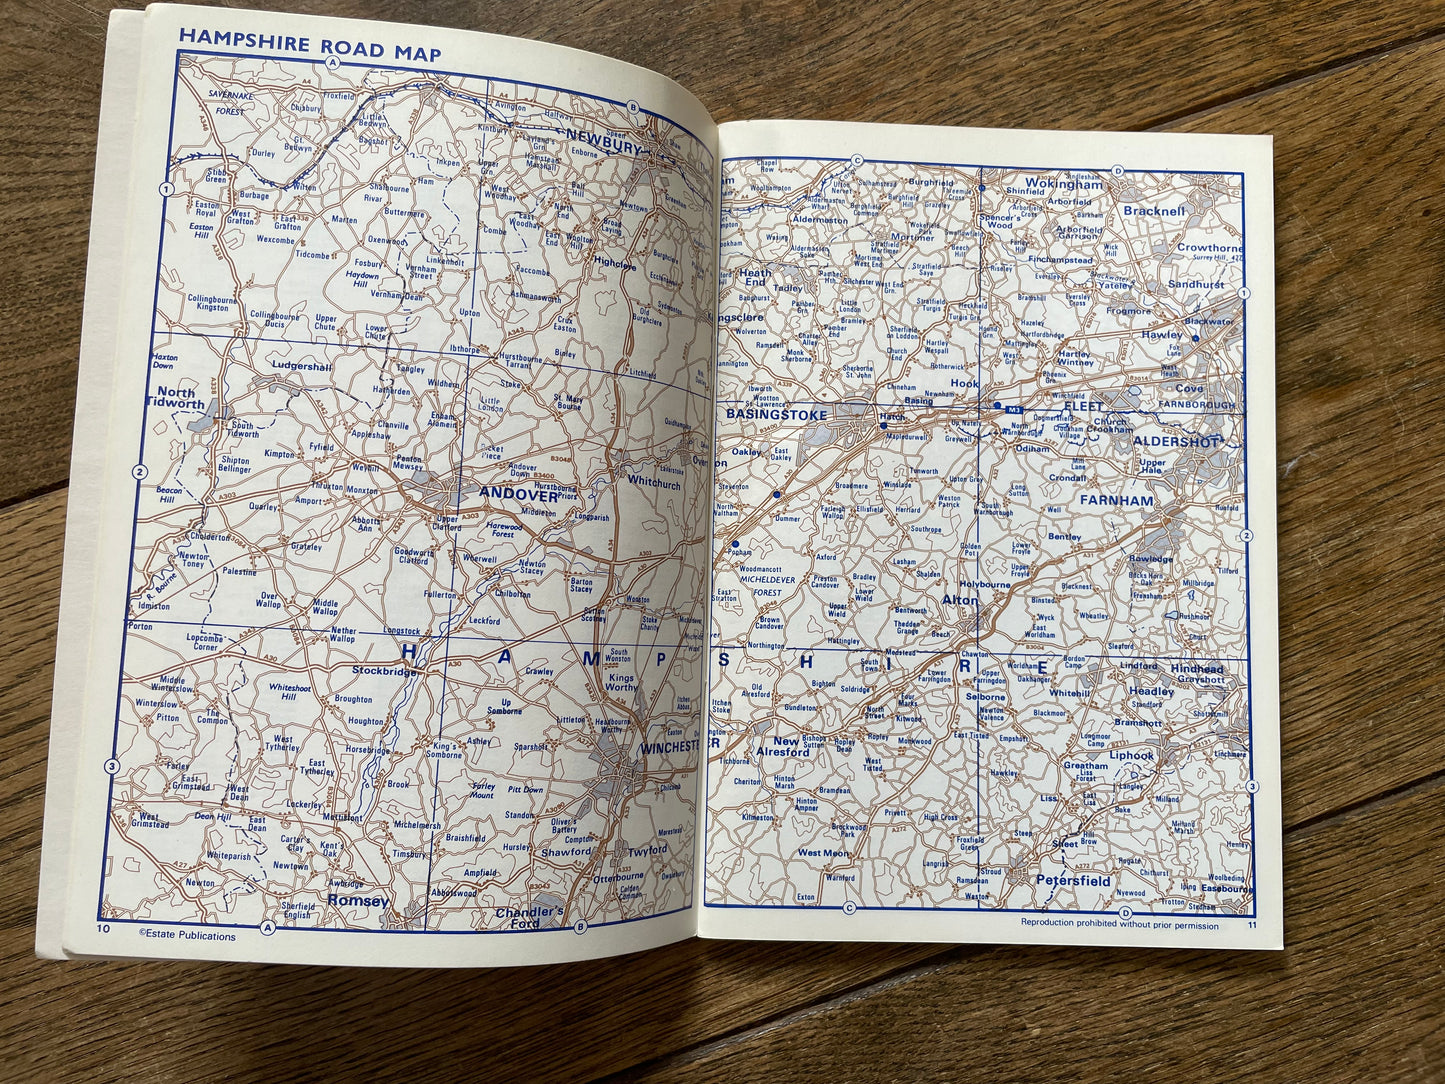 Estate Publications Red Book Map of Hampshire 4th Edition